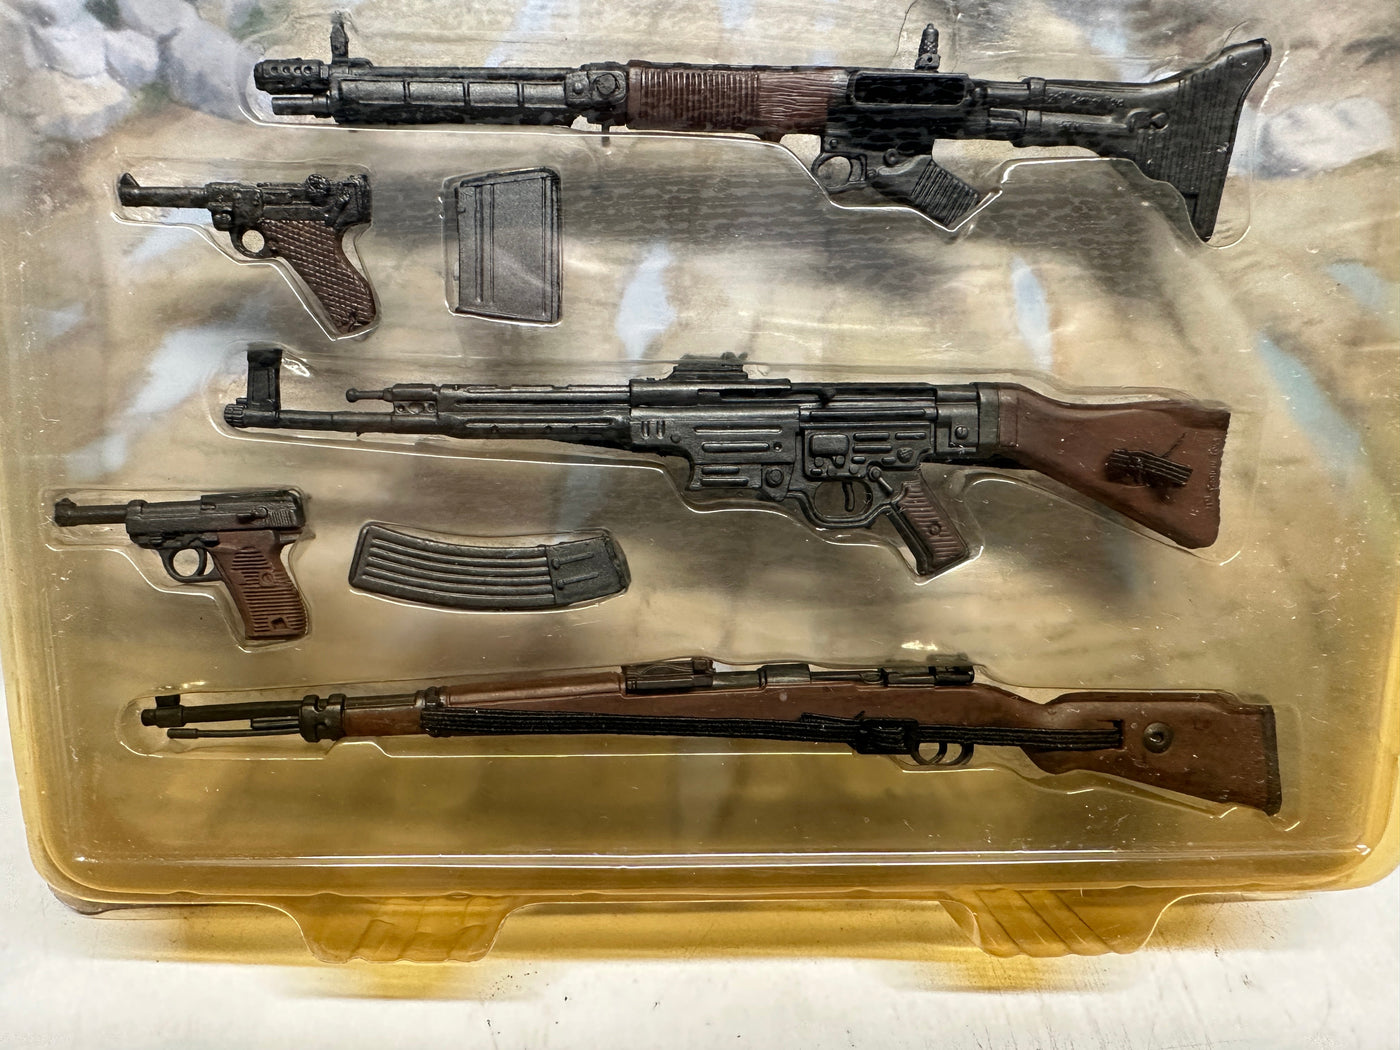 1/6th scale German WWII Weapons set, (2003 production)